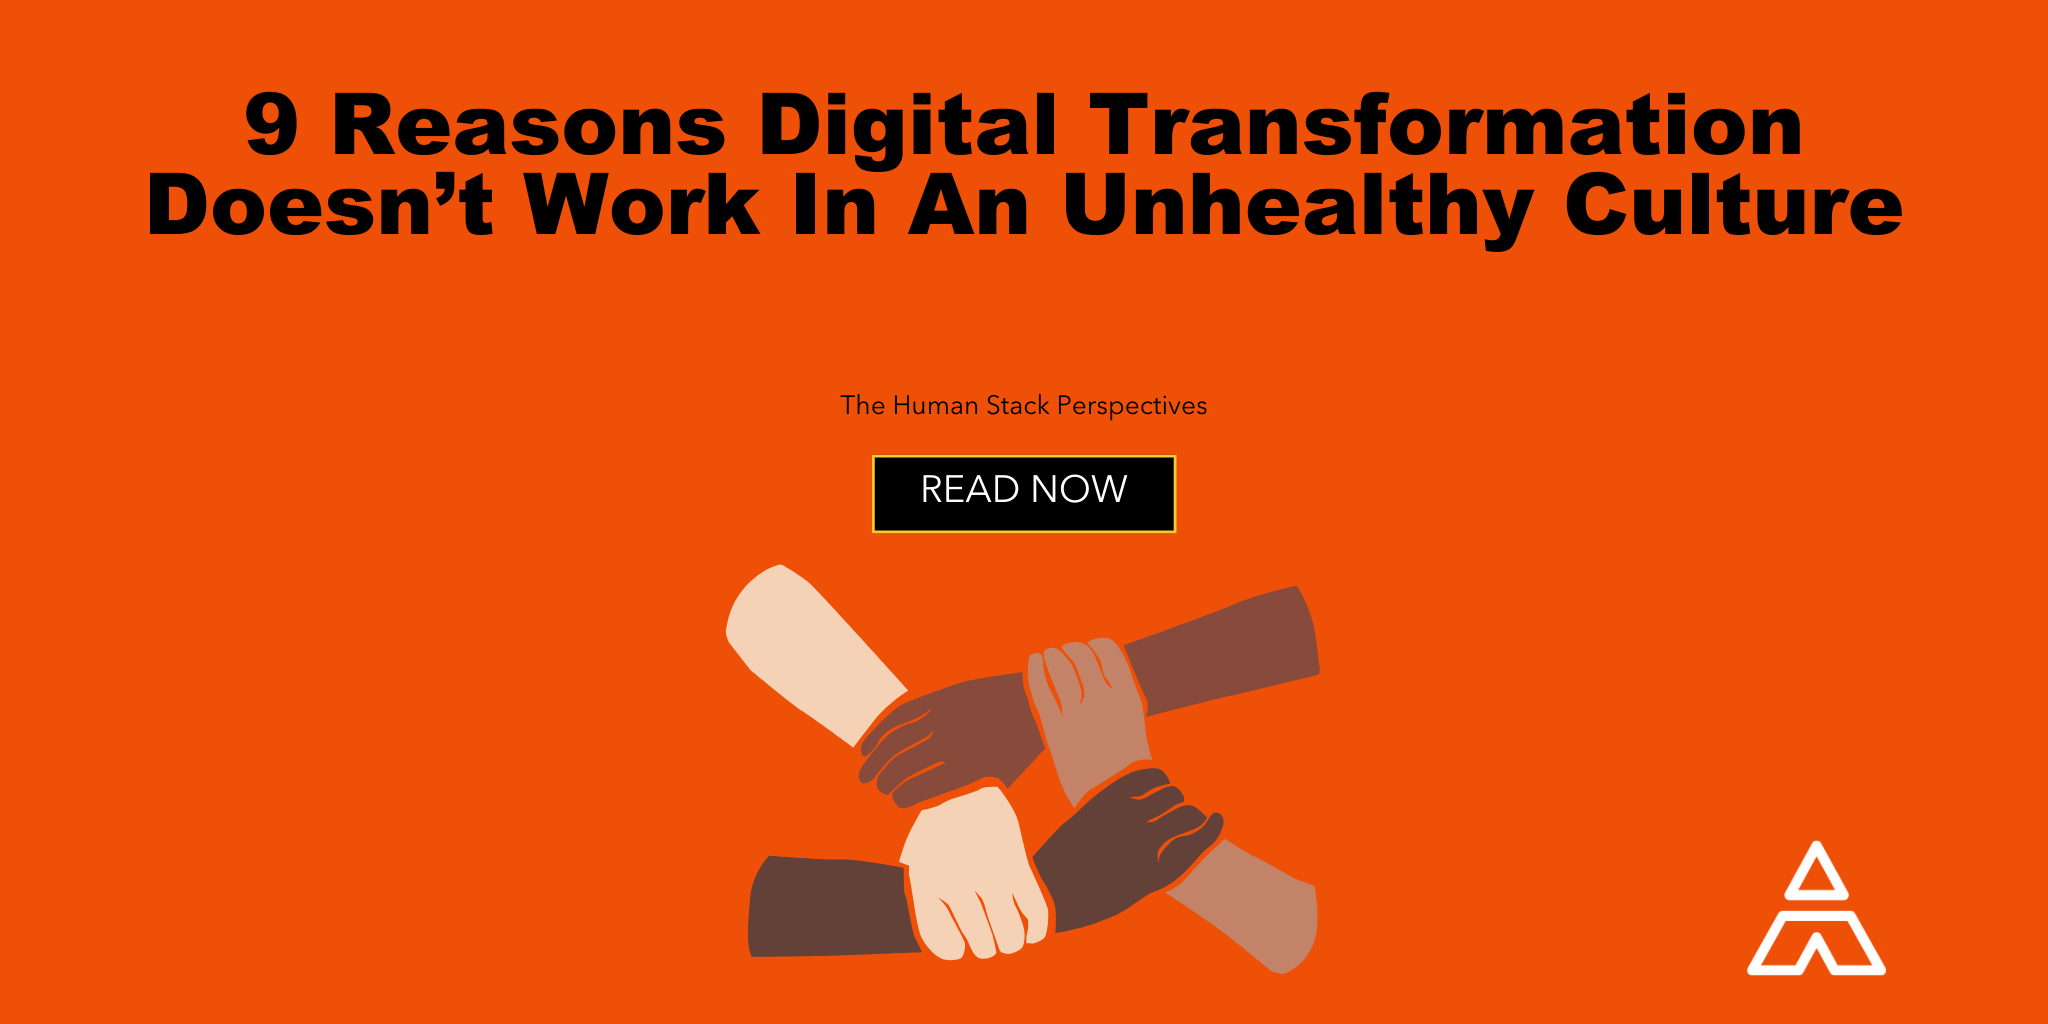 9 Reasons Digital Transformation Doesn’t Work In An Unhealthy Culture